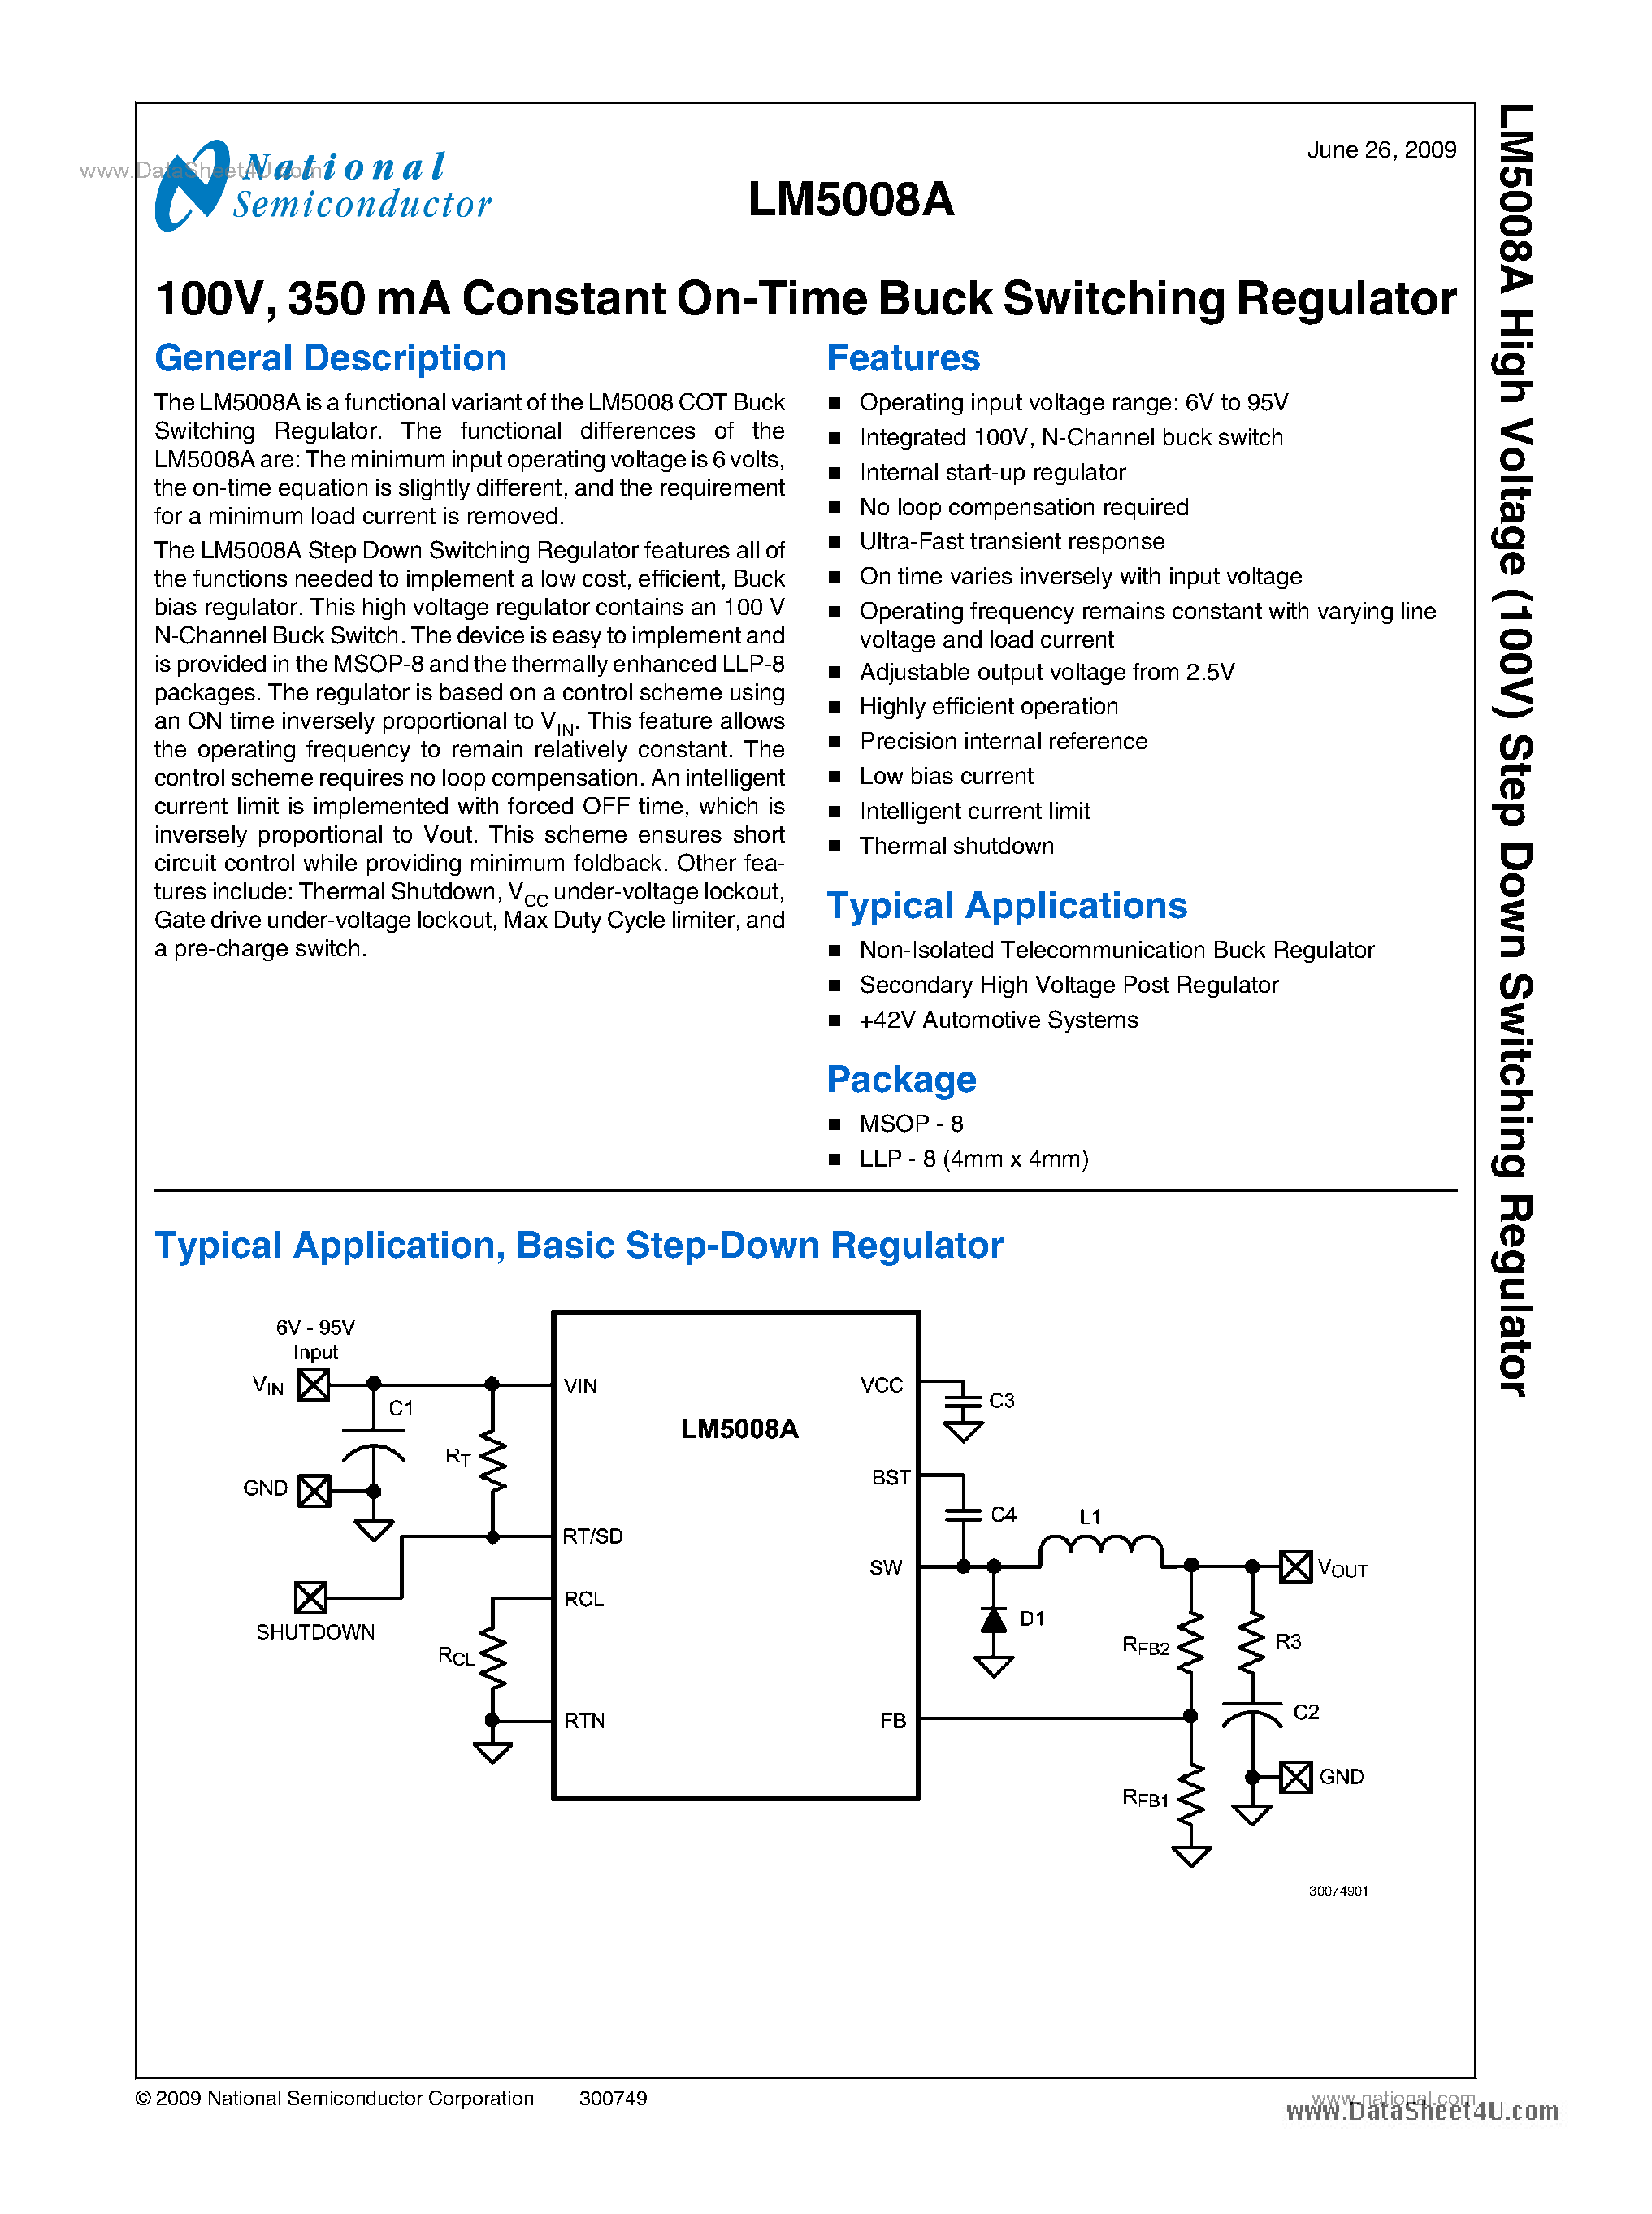 Datasheet LM5008A - 350 mA Constant On-Time Buck Switching Regulator page 1